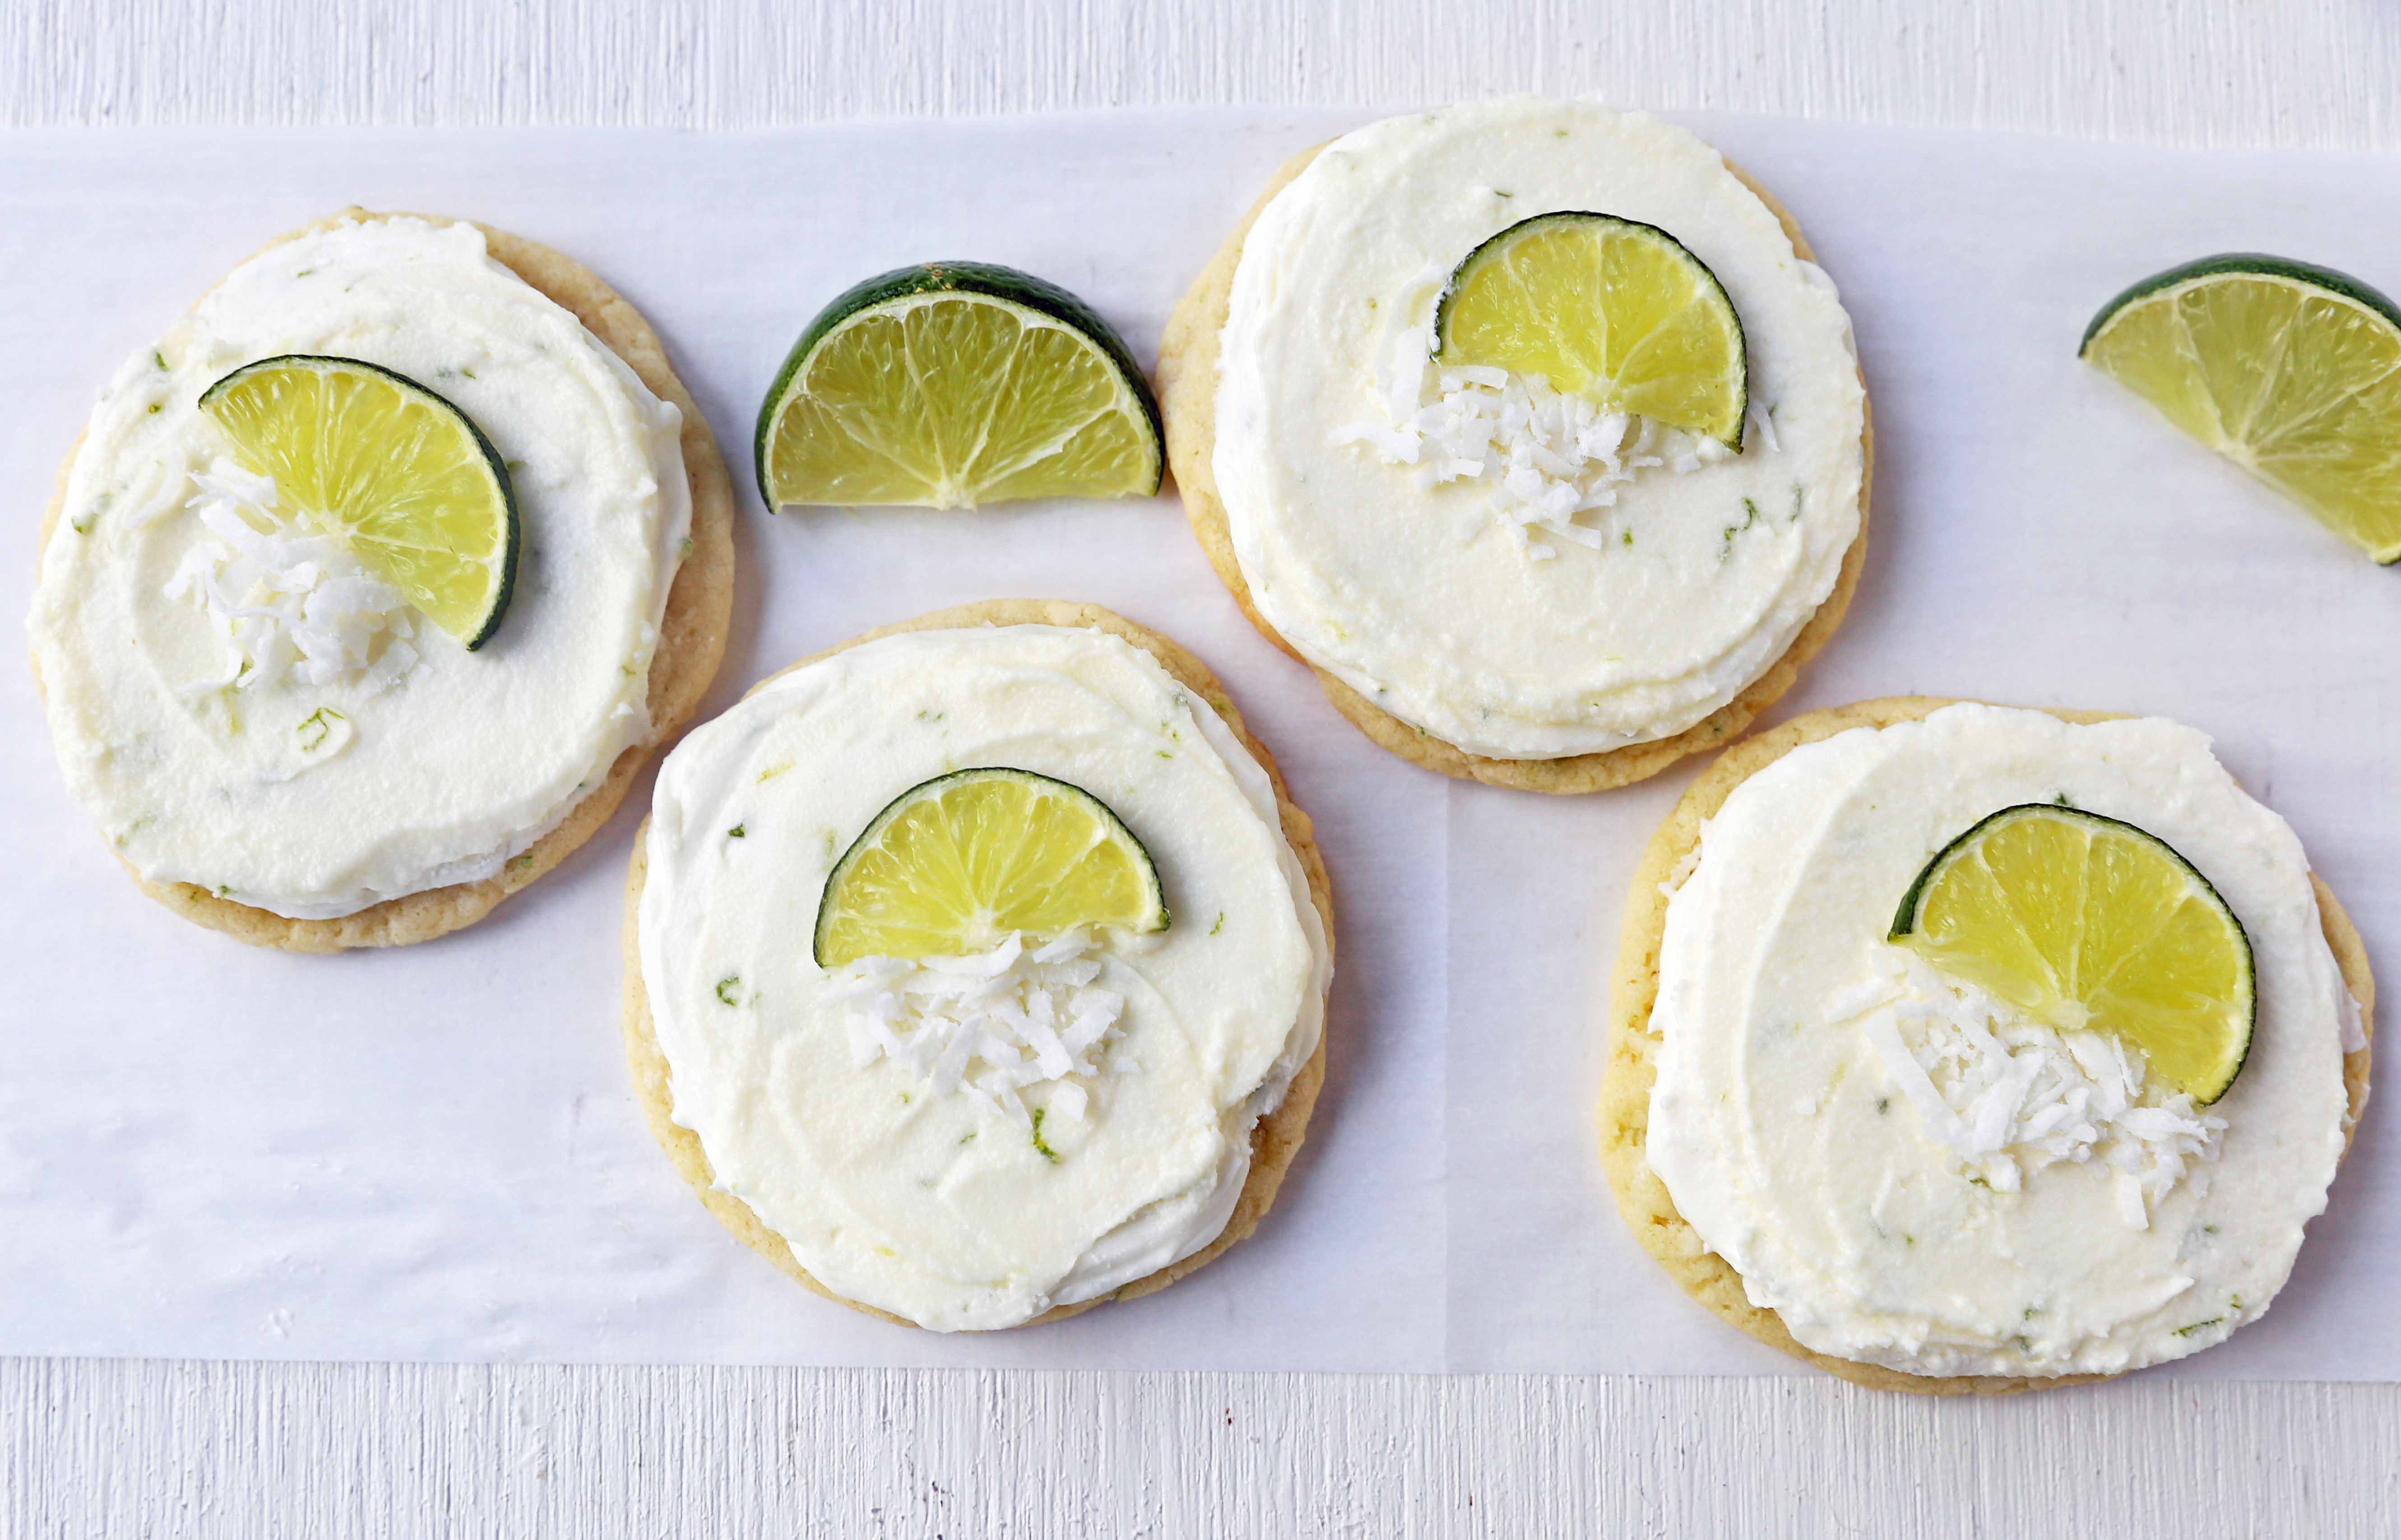 Key Lime Cookies with Coconut Lime Frosting. Chewy fresh coconut lime cookies with a creamy coconut lime frosting. The perfect tropical Caribbean cookie! www.modernhoney.com #keylimecookie #limecookie #coconutlimecookie 